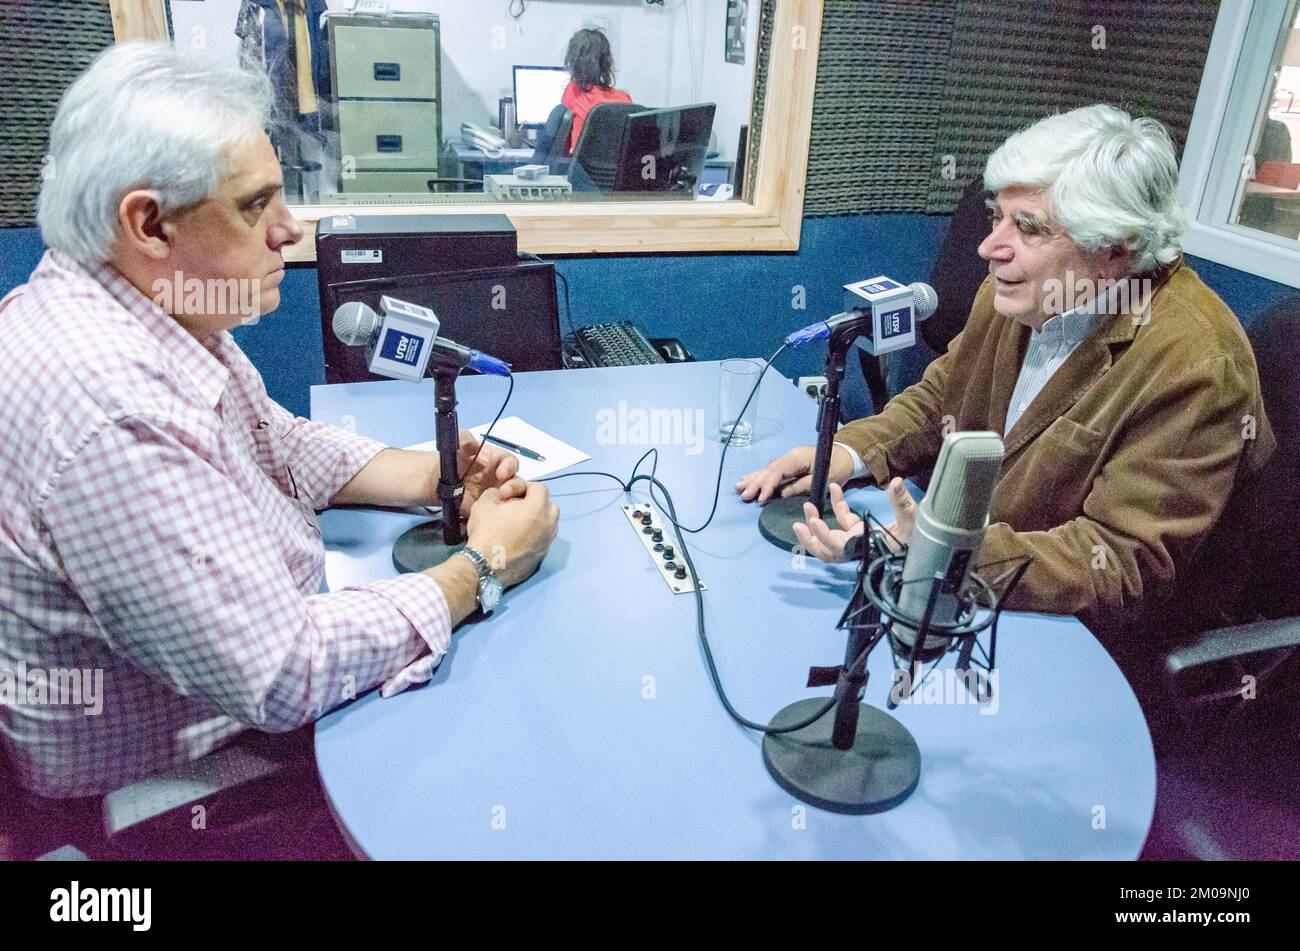 Avellaneda, Buenos Aires, Argentina - May 12, 2014: The poet, philosopher and journalist Vicente Zito Lema in an interview at a university radio stati Stock Photo